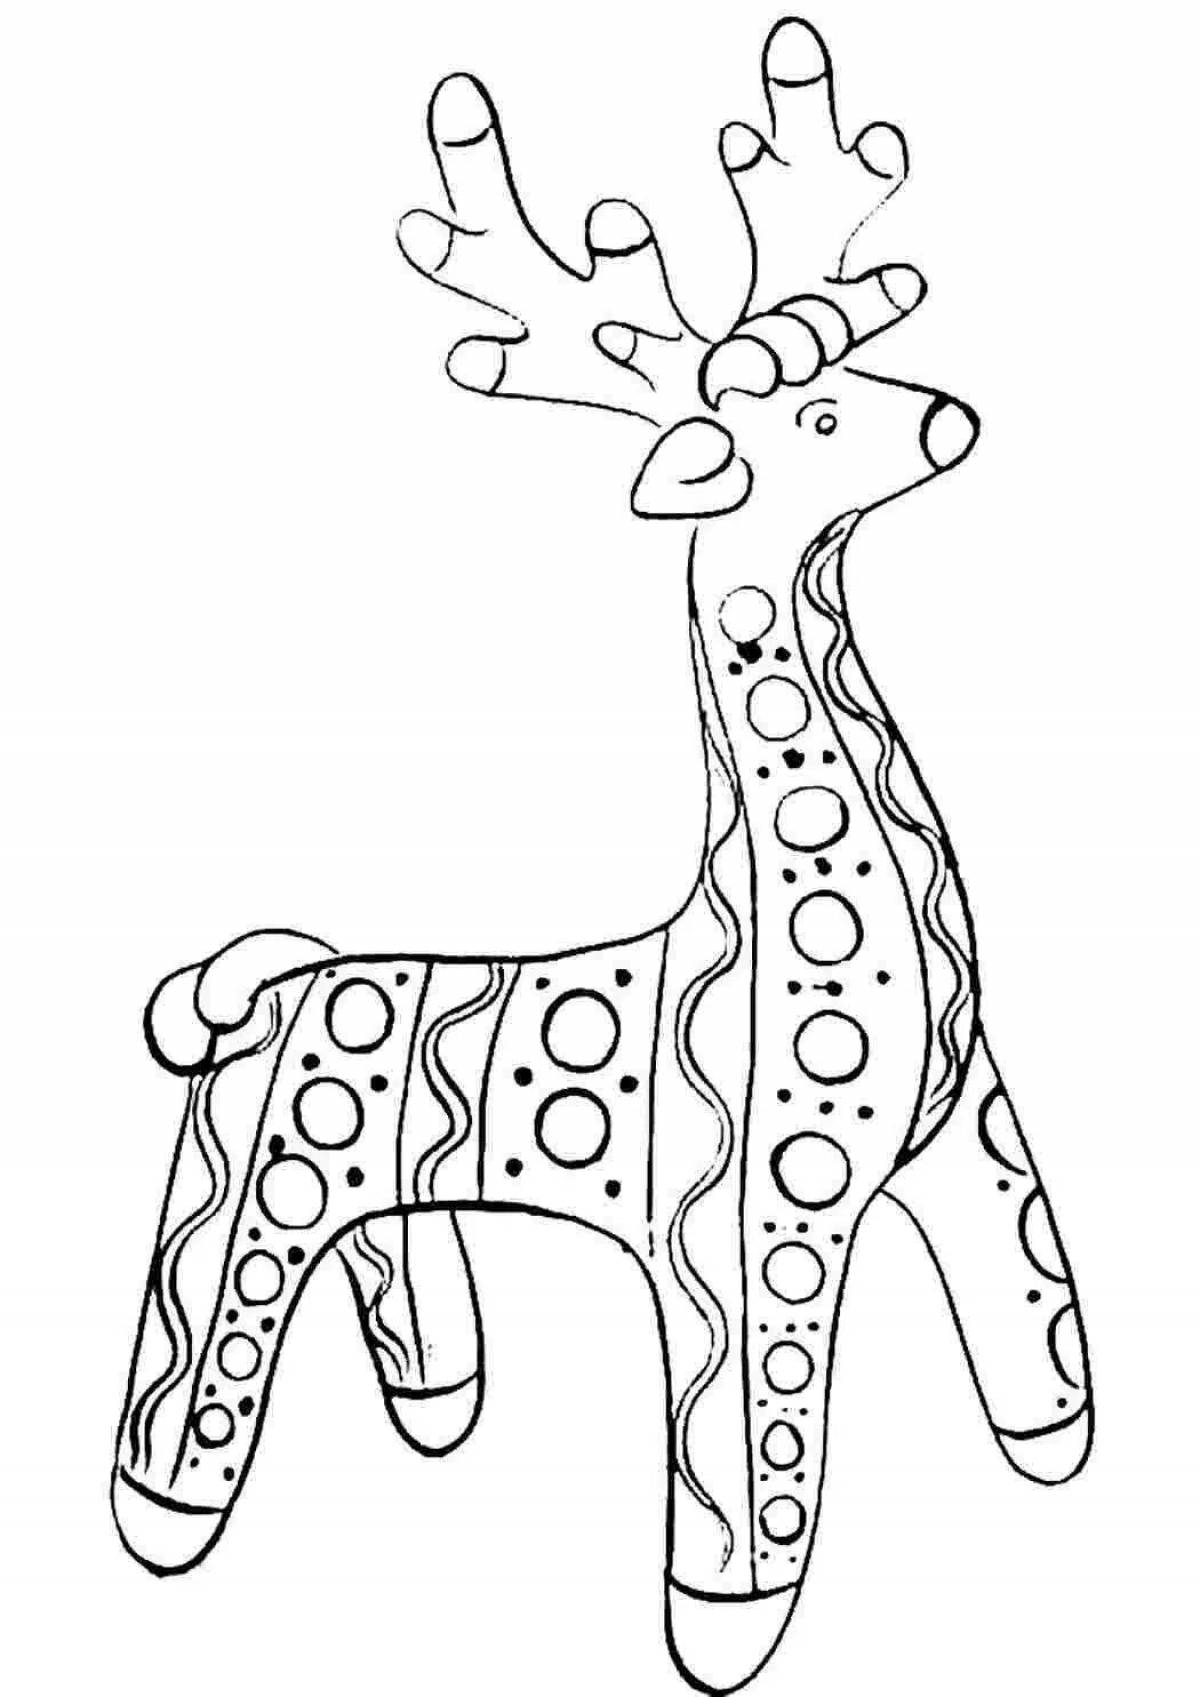 Animated Whistle Coloring Page for Toddlers